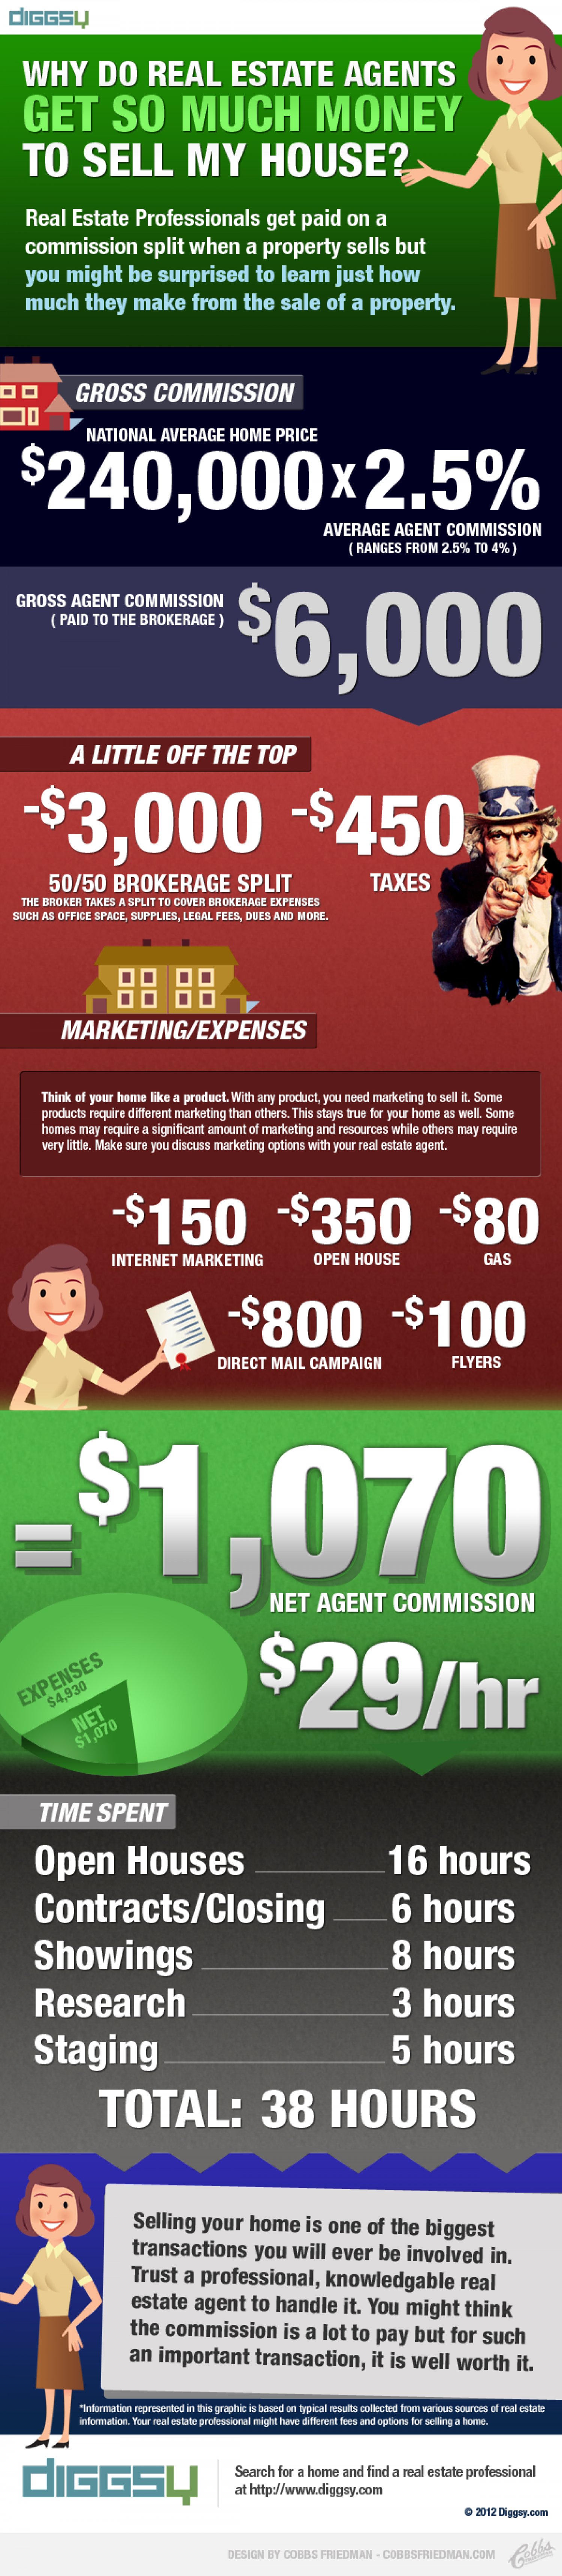 Why Do Real Estate Agents Get Paid So Much Money to Sell My House?  Infographic